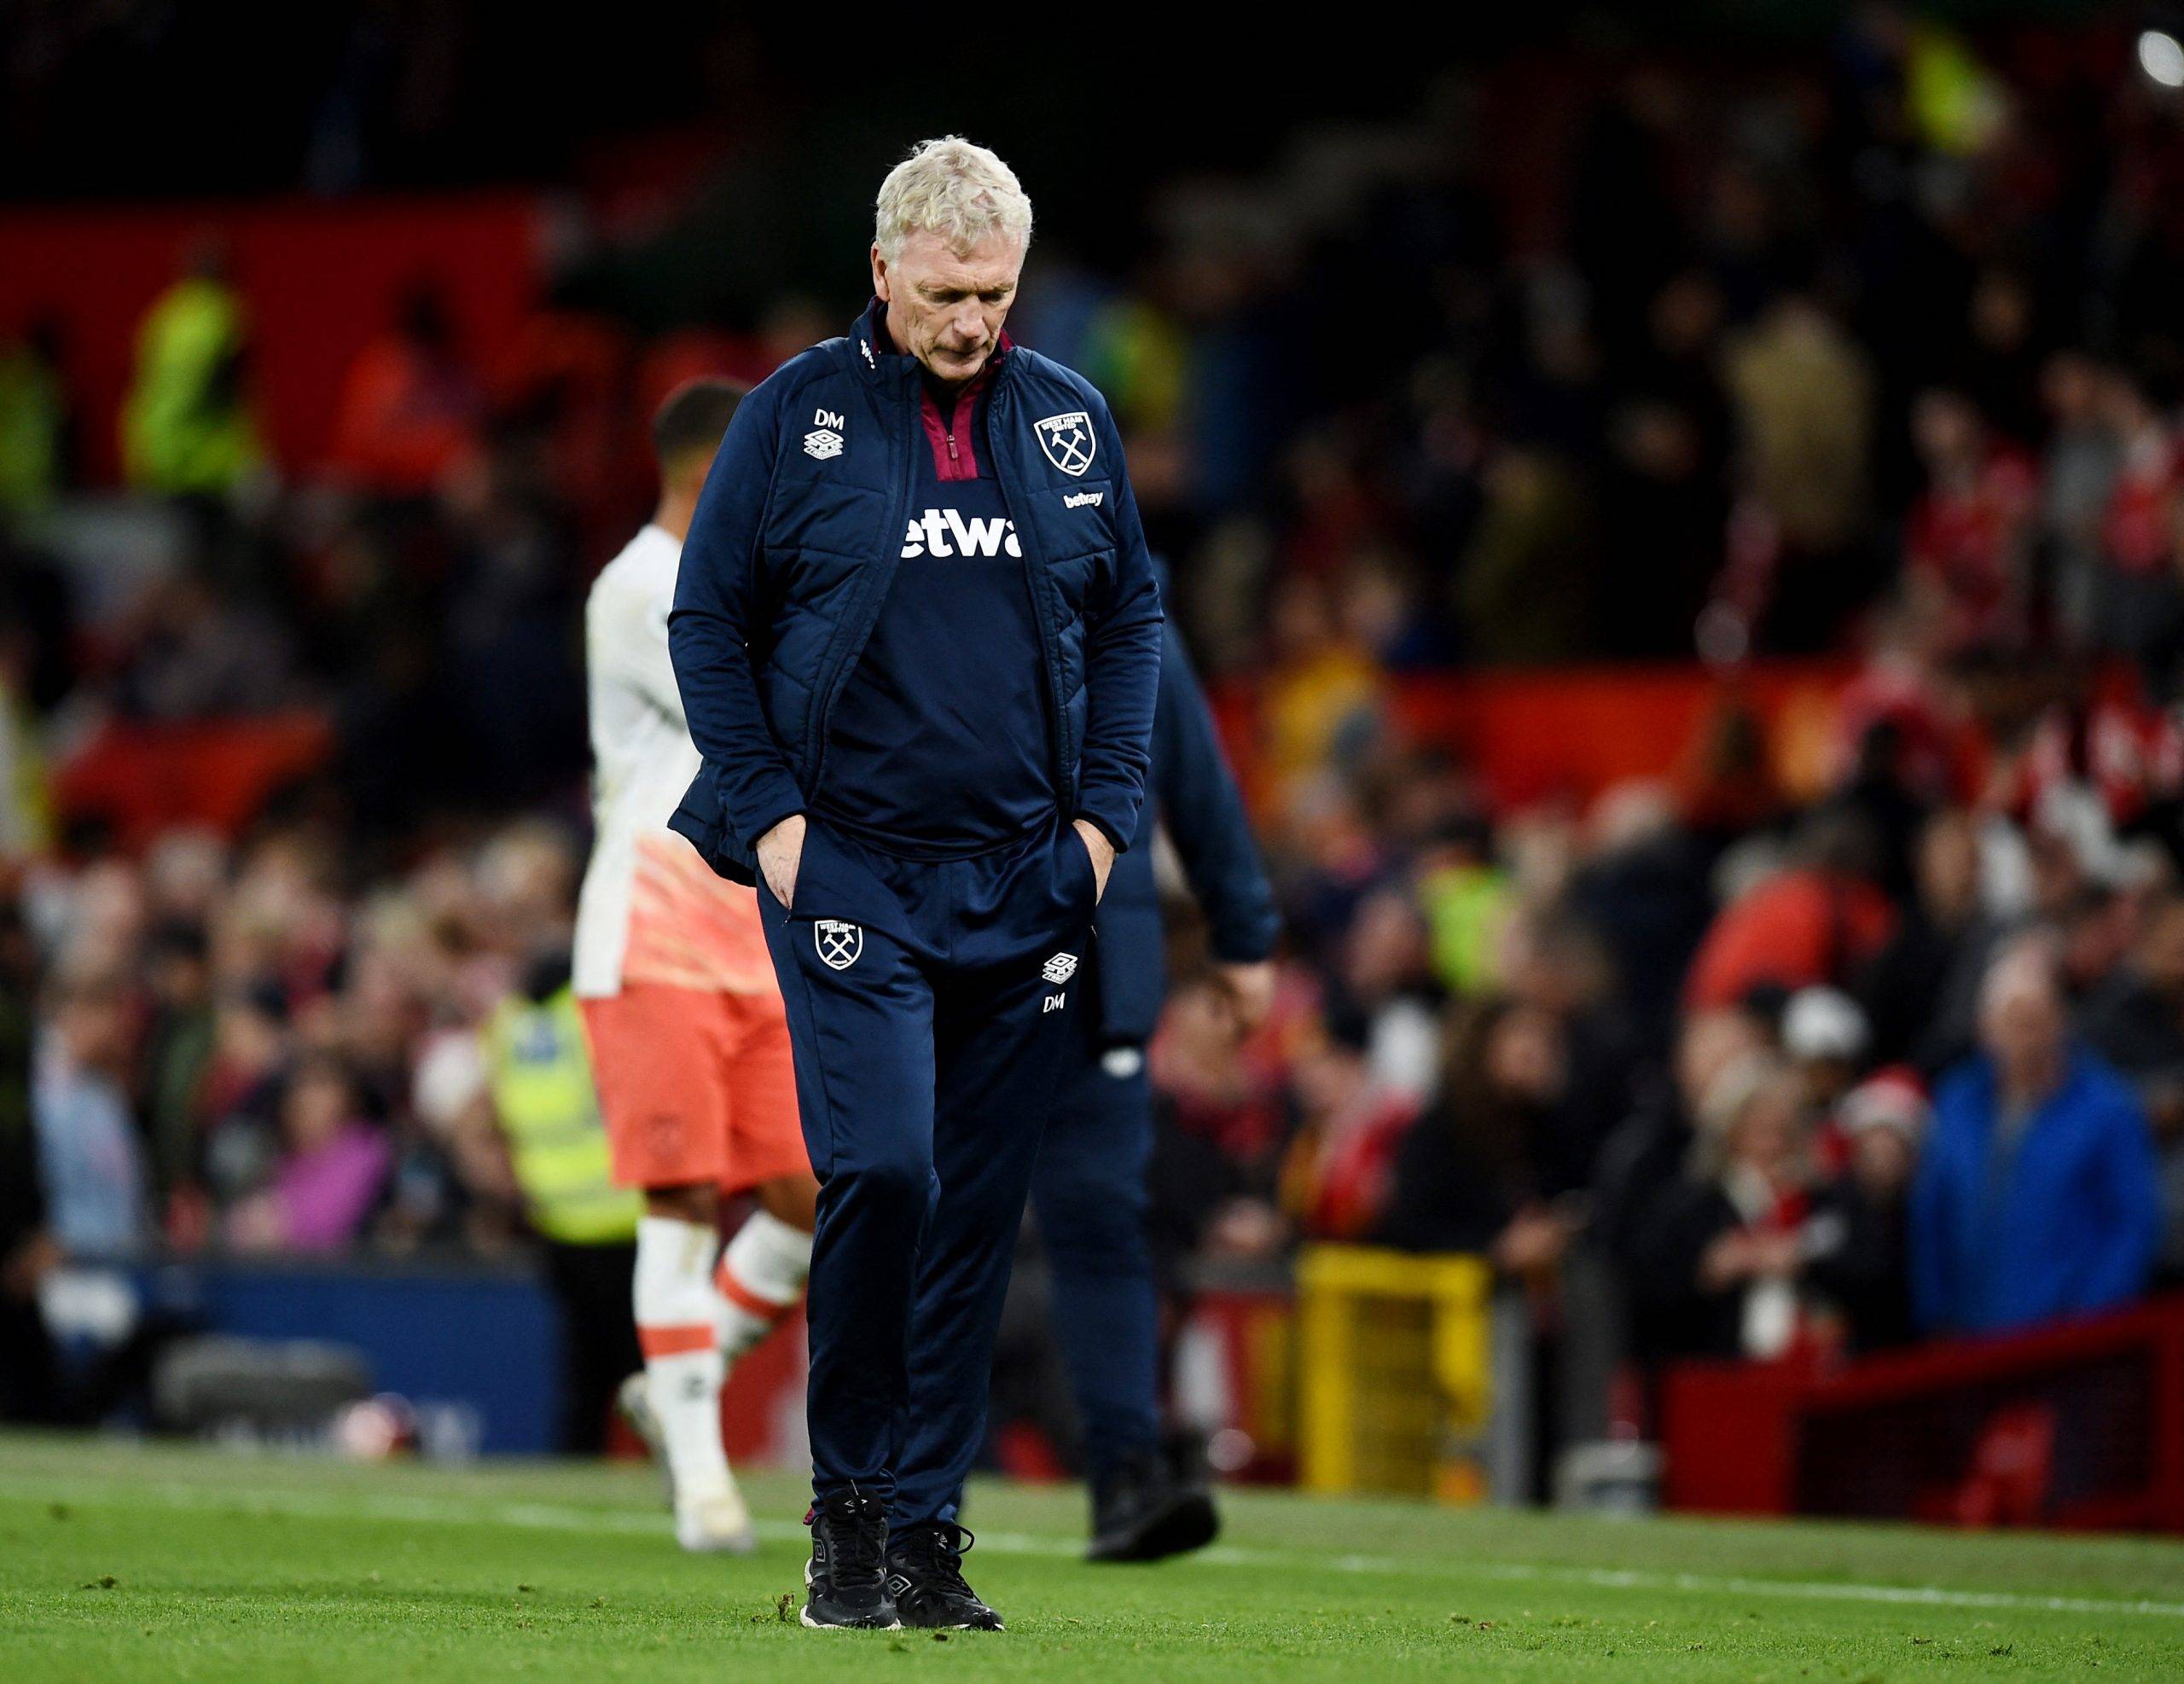 West Ham: David Moyes could be sacked if Irons lose next game - Premier League News